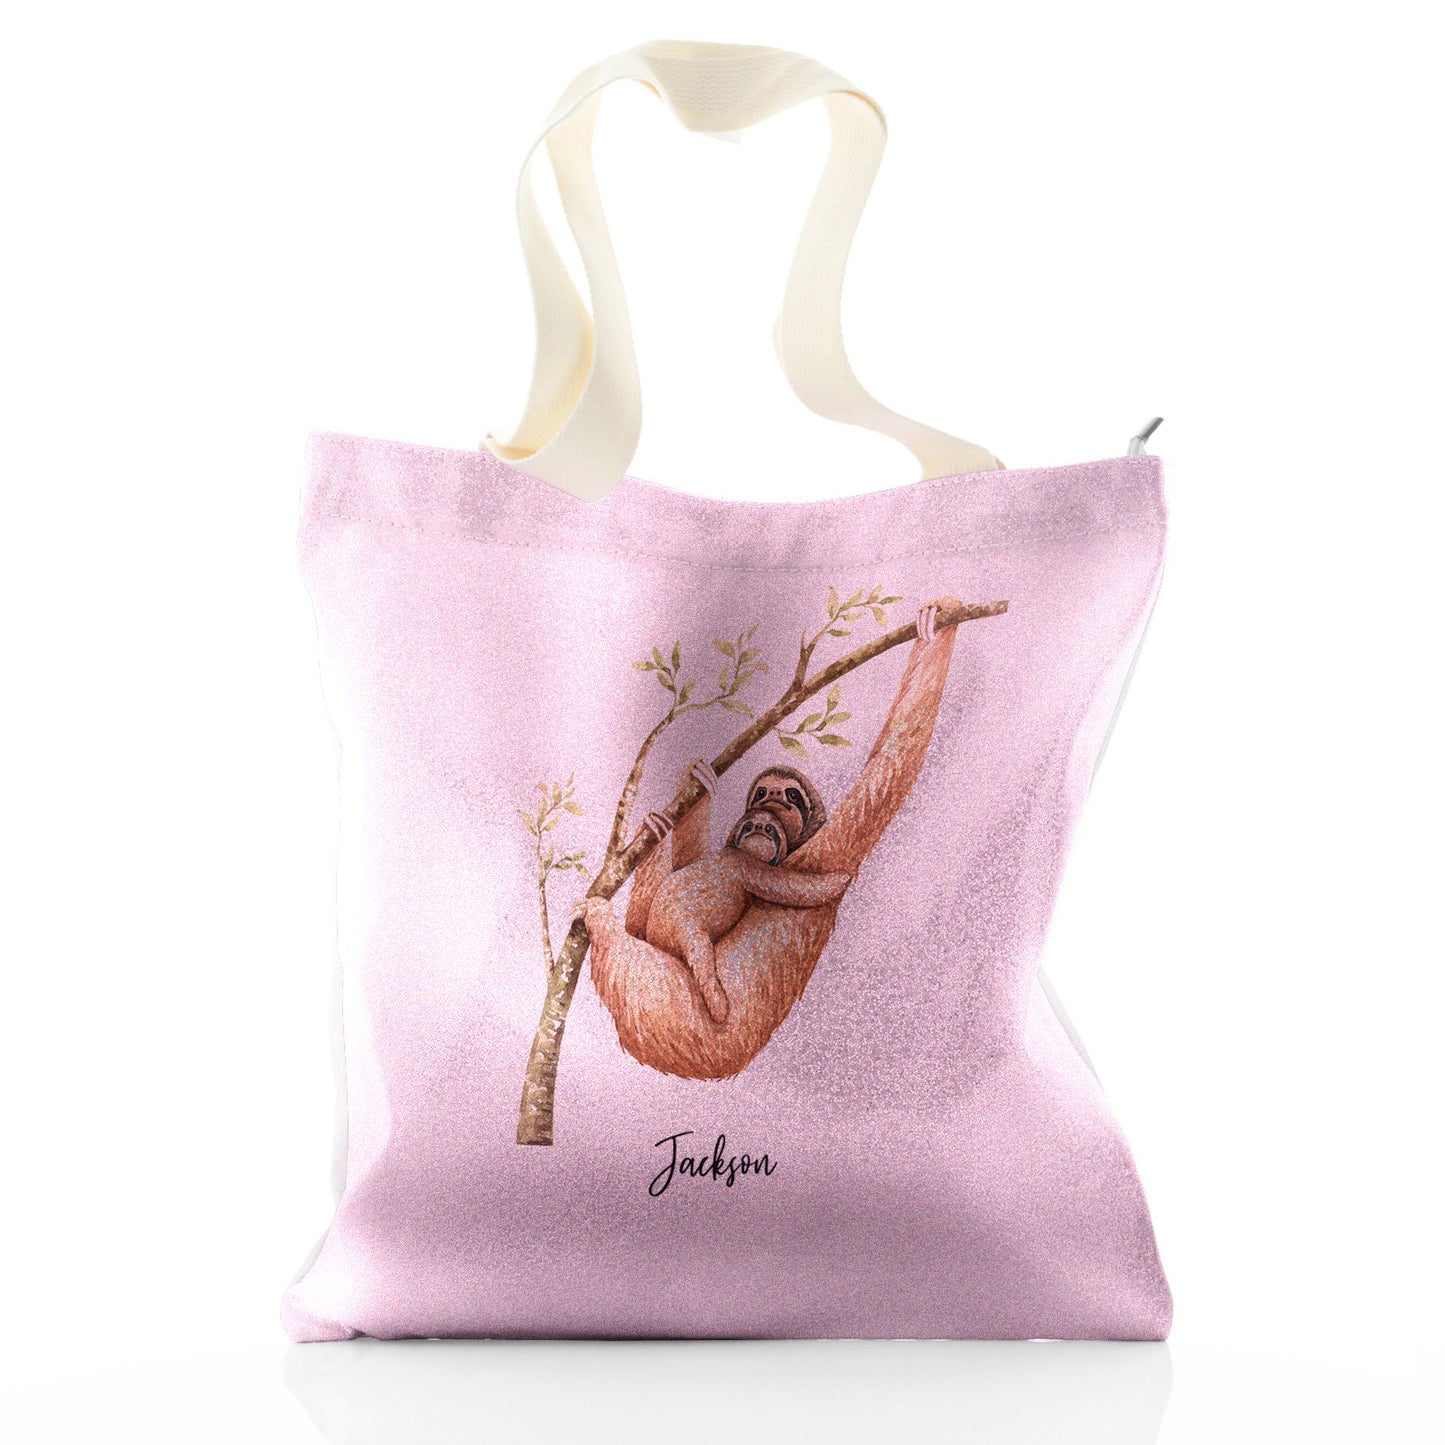 Personalised Glitter Tote Bag with Welcoming Text and Climbing Mum and Baby Sloths